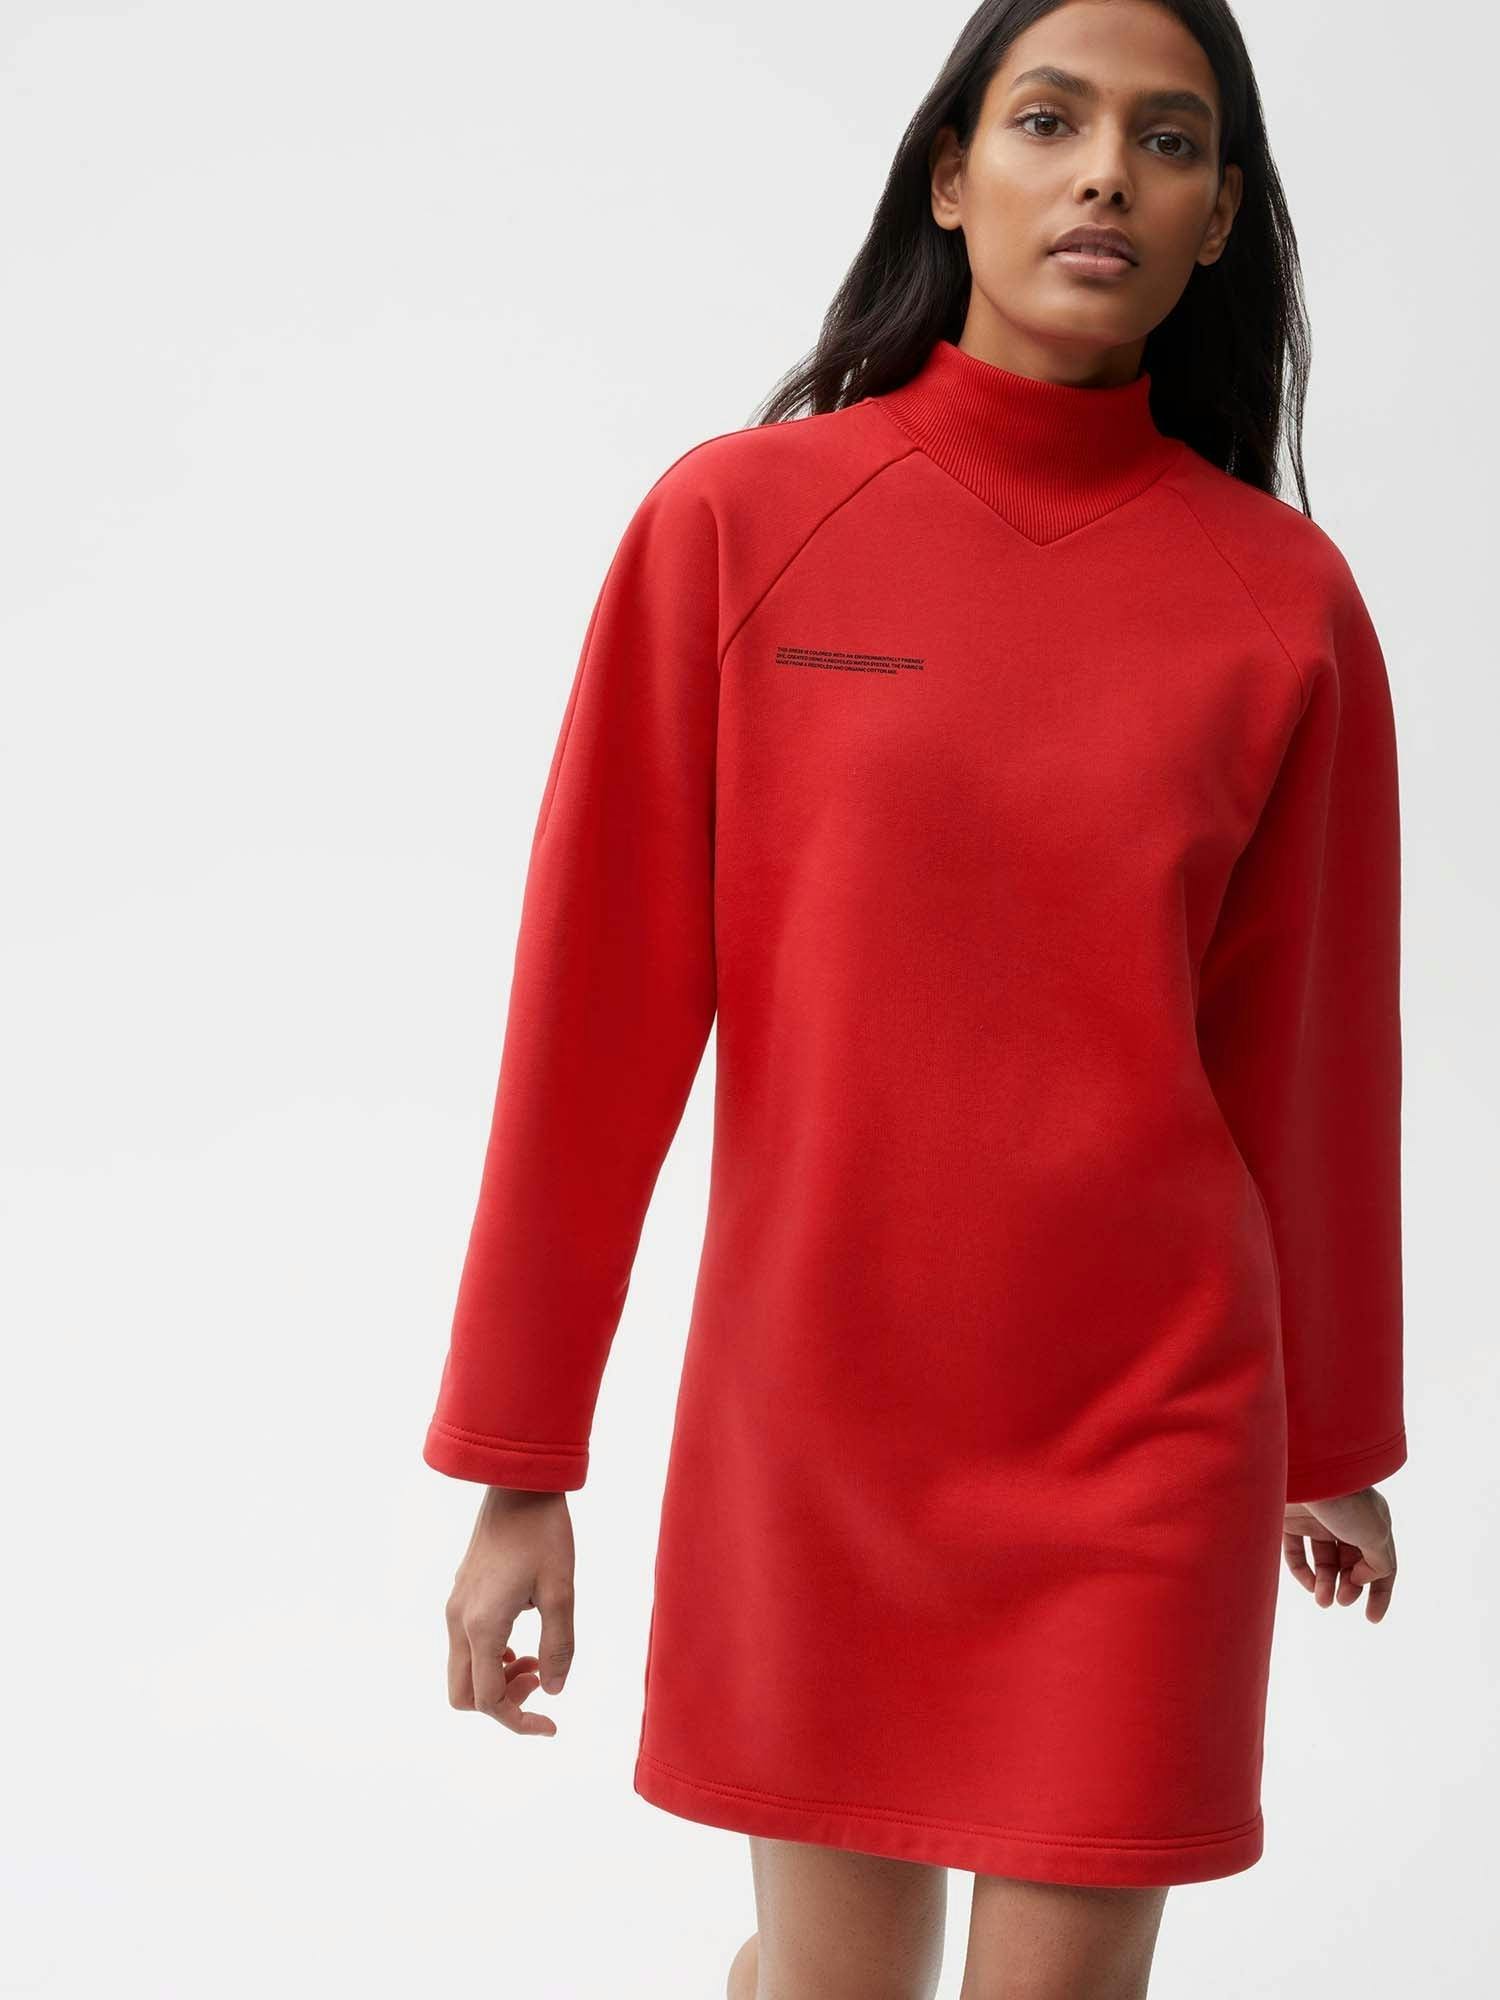 https://cdn.shopify.com/s/files/1/0035/1309/0115/products/Womens-Heavyweight-Recycled-Cotton-Funnel-Neck-Dress-Apple-Red_5.jpg?v=1671123612